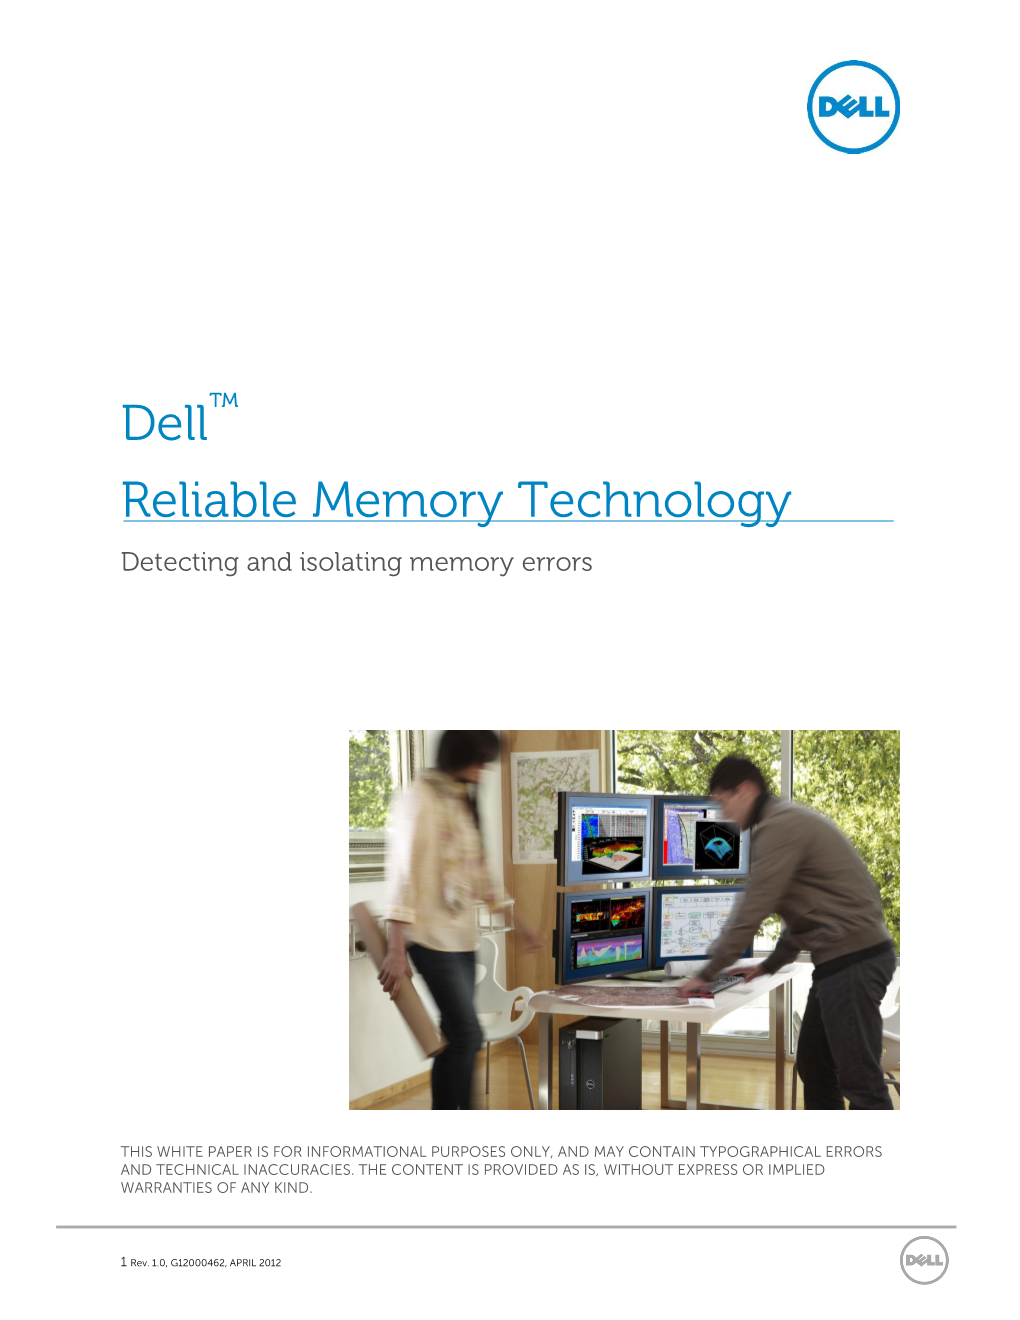 Dell Reliable Memory Technology (RMT) and Looks at Some of the Root Causes of Memory Errors and How RMT Helps to Remediate and Obviate Memory Errors